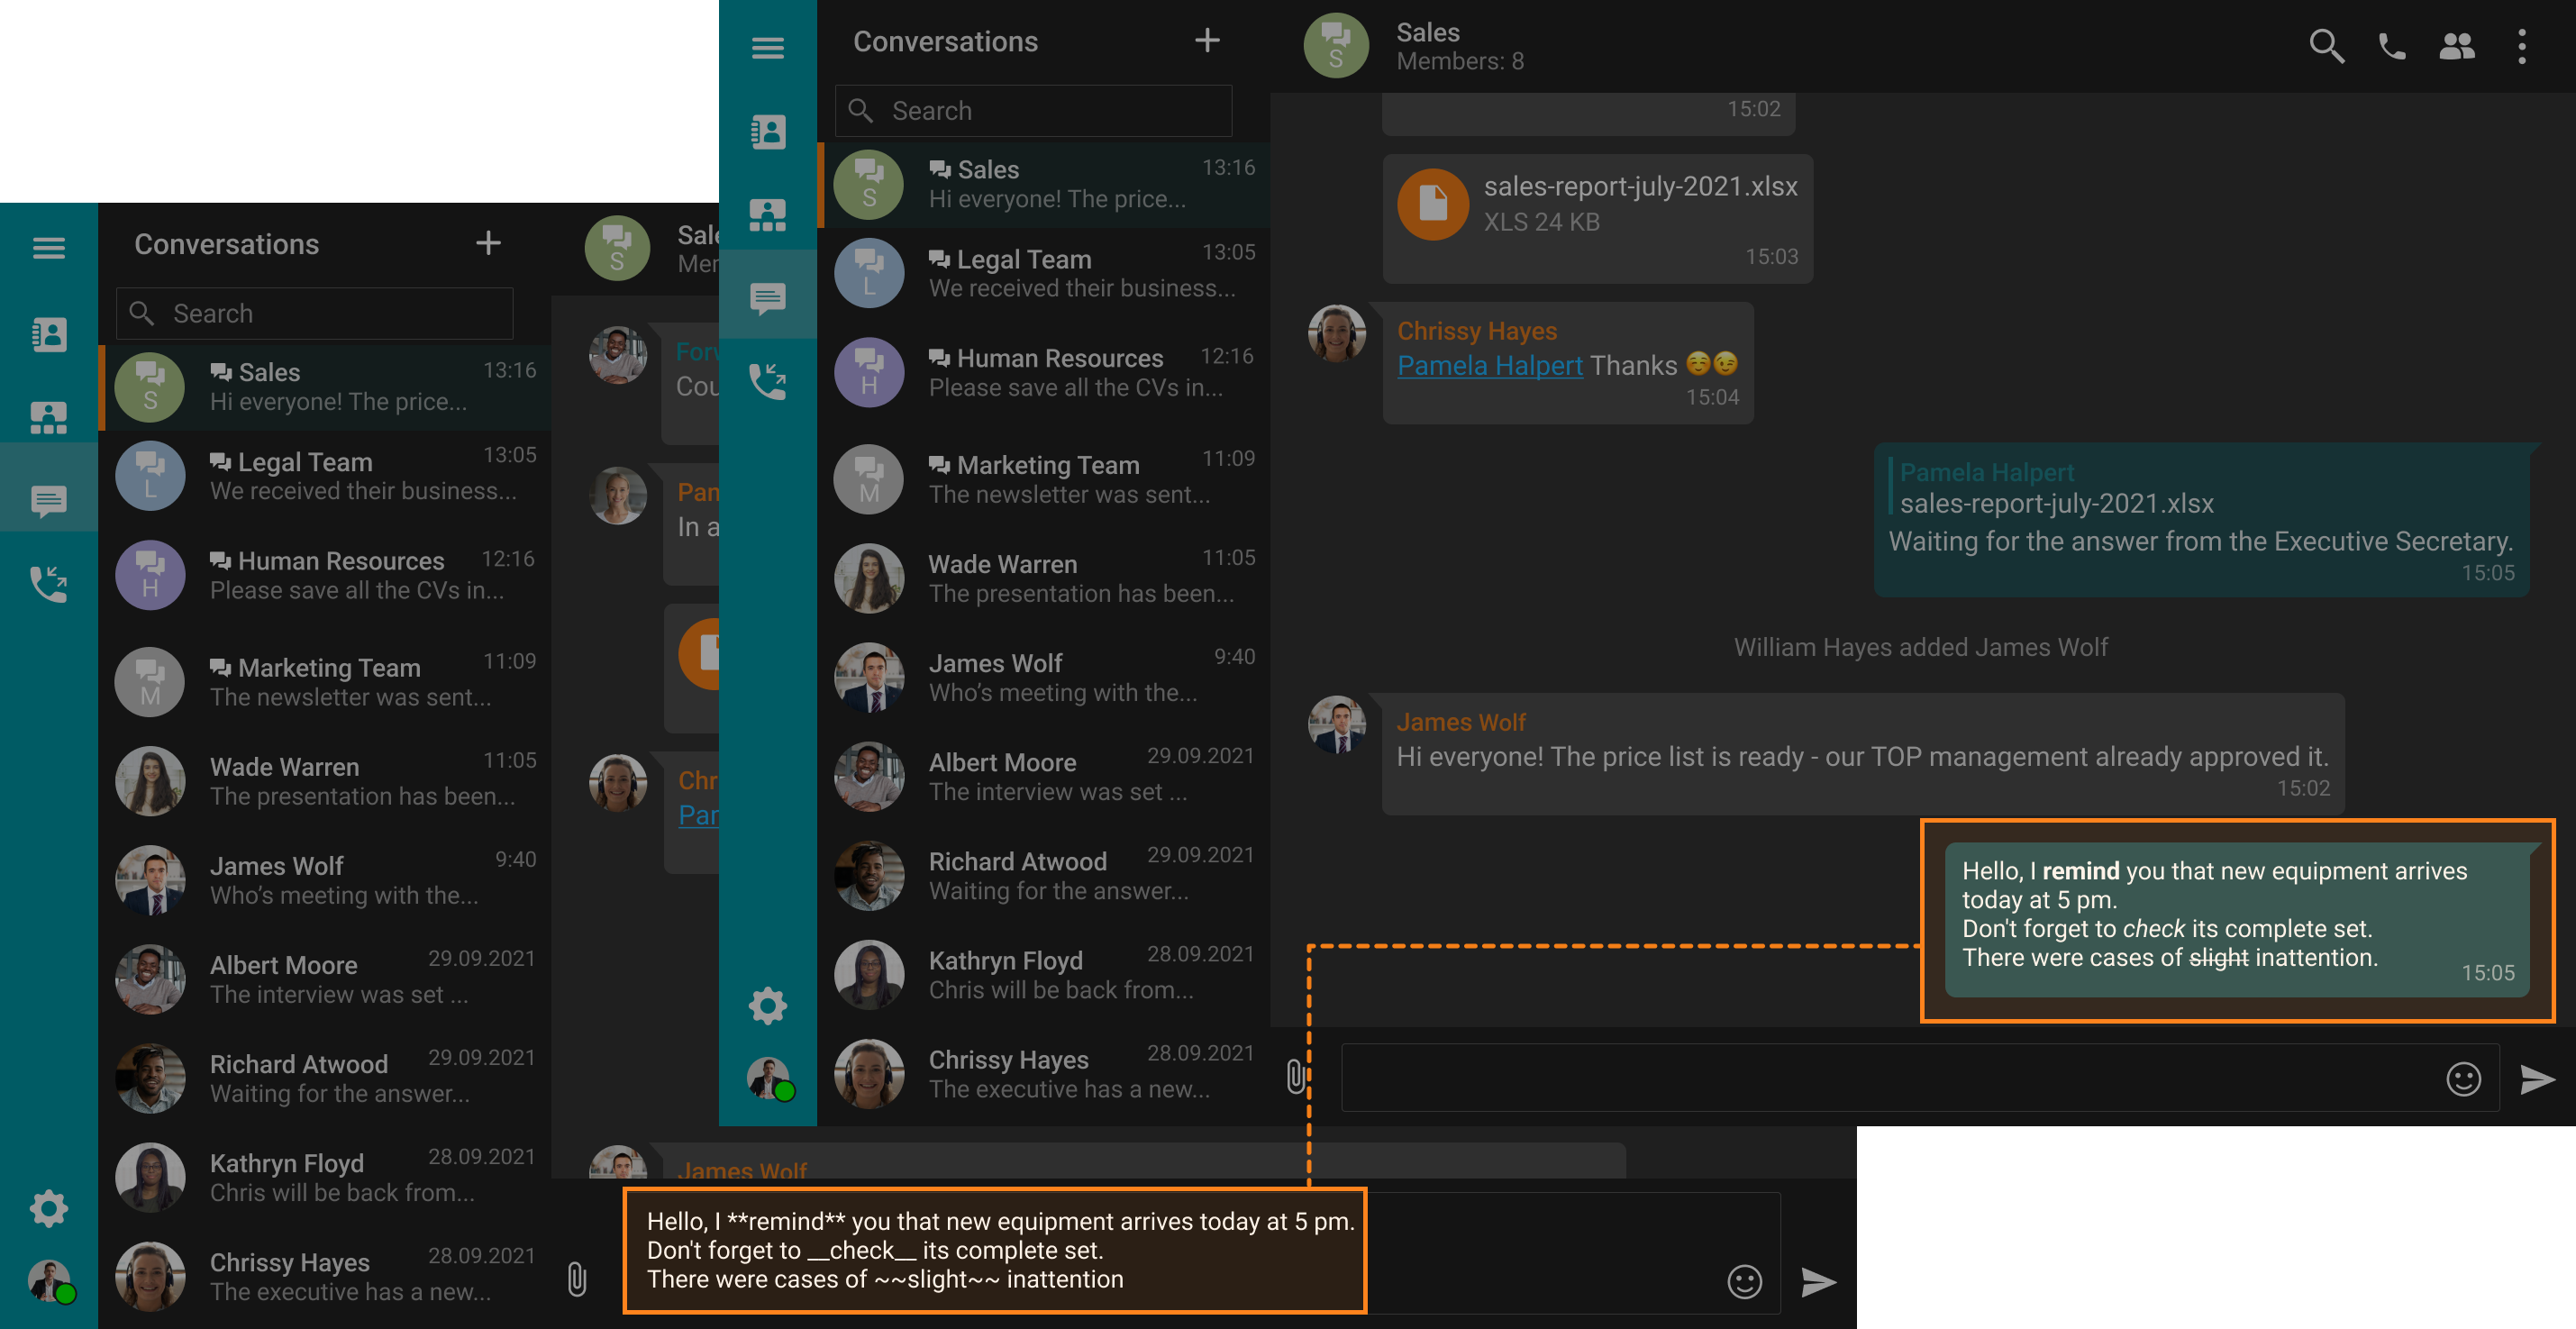 TrueConf 8.1 for Windows: Enhanced team messaging, media player for recordings, and automatic content spotlight 3